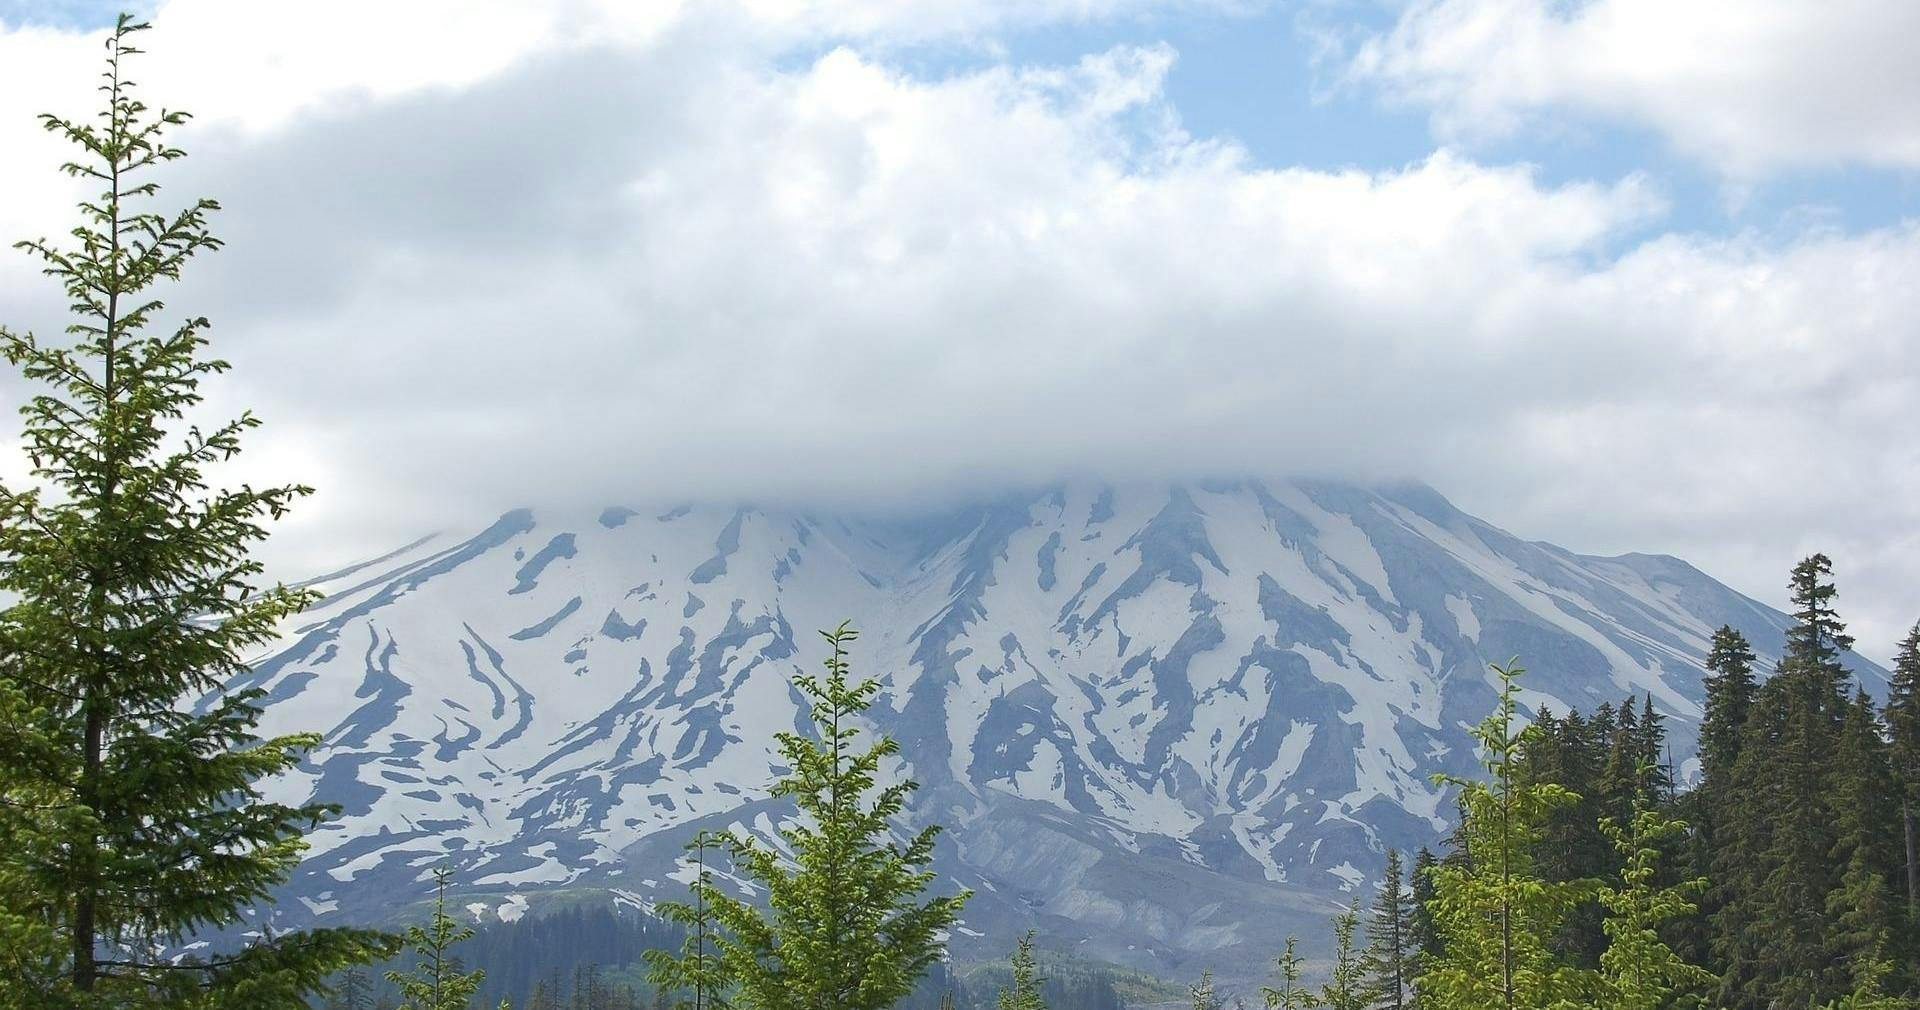 Mt. St. Helens adventure tour from Portland